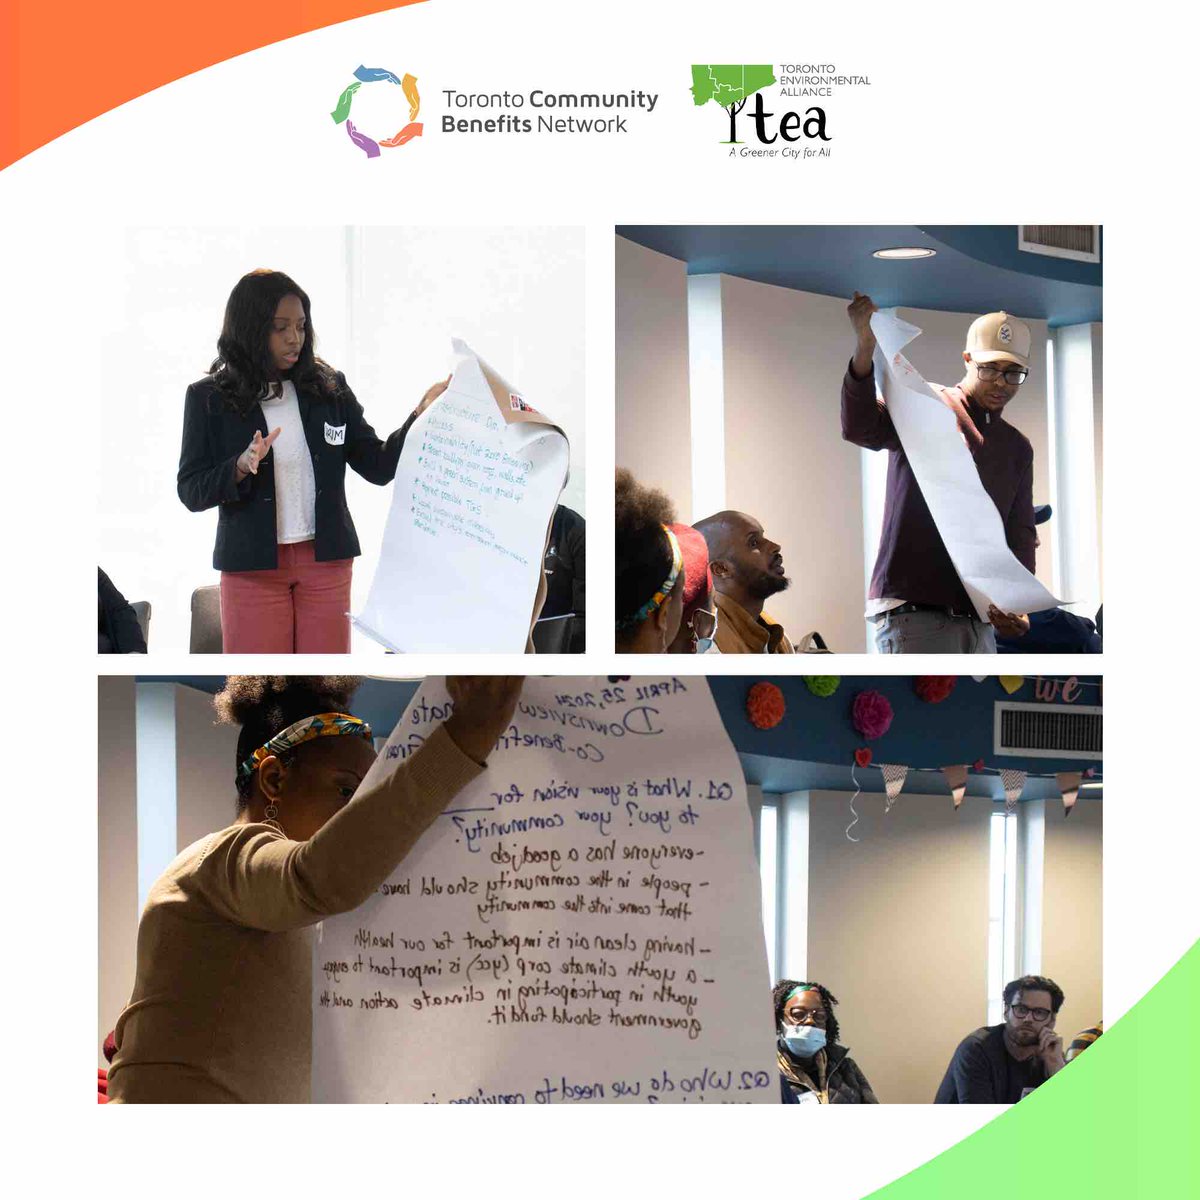 Thank you to everyone who attended the Downsview Climate Action Workshop, in partnership with @TOenviro, at the Downsview Library! Participants were able to engage with the concepts of climate justice, sustainable development and advocacy #communitybenefits #climateaction